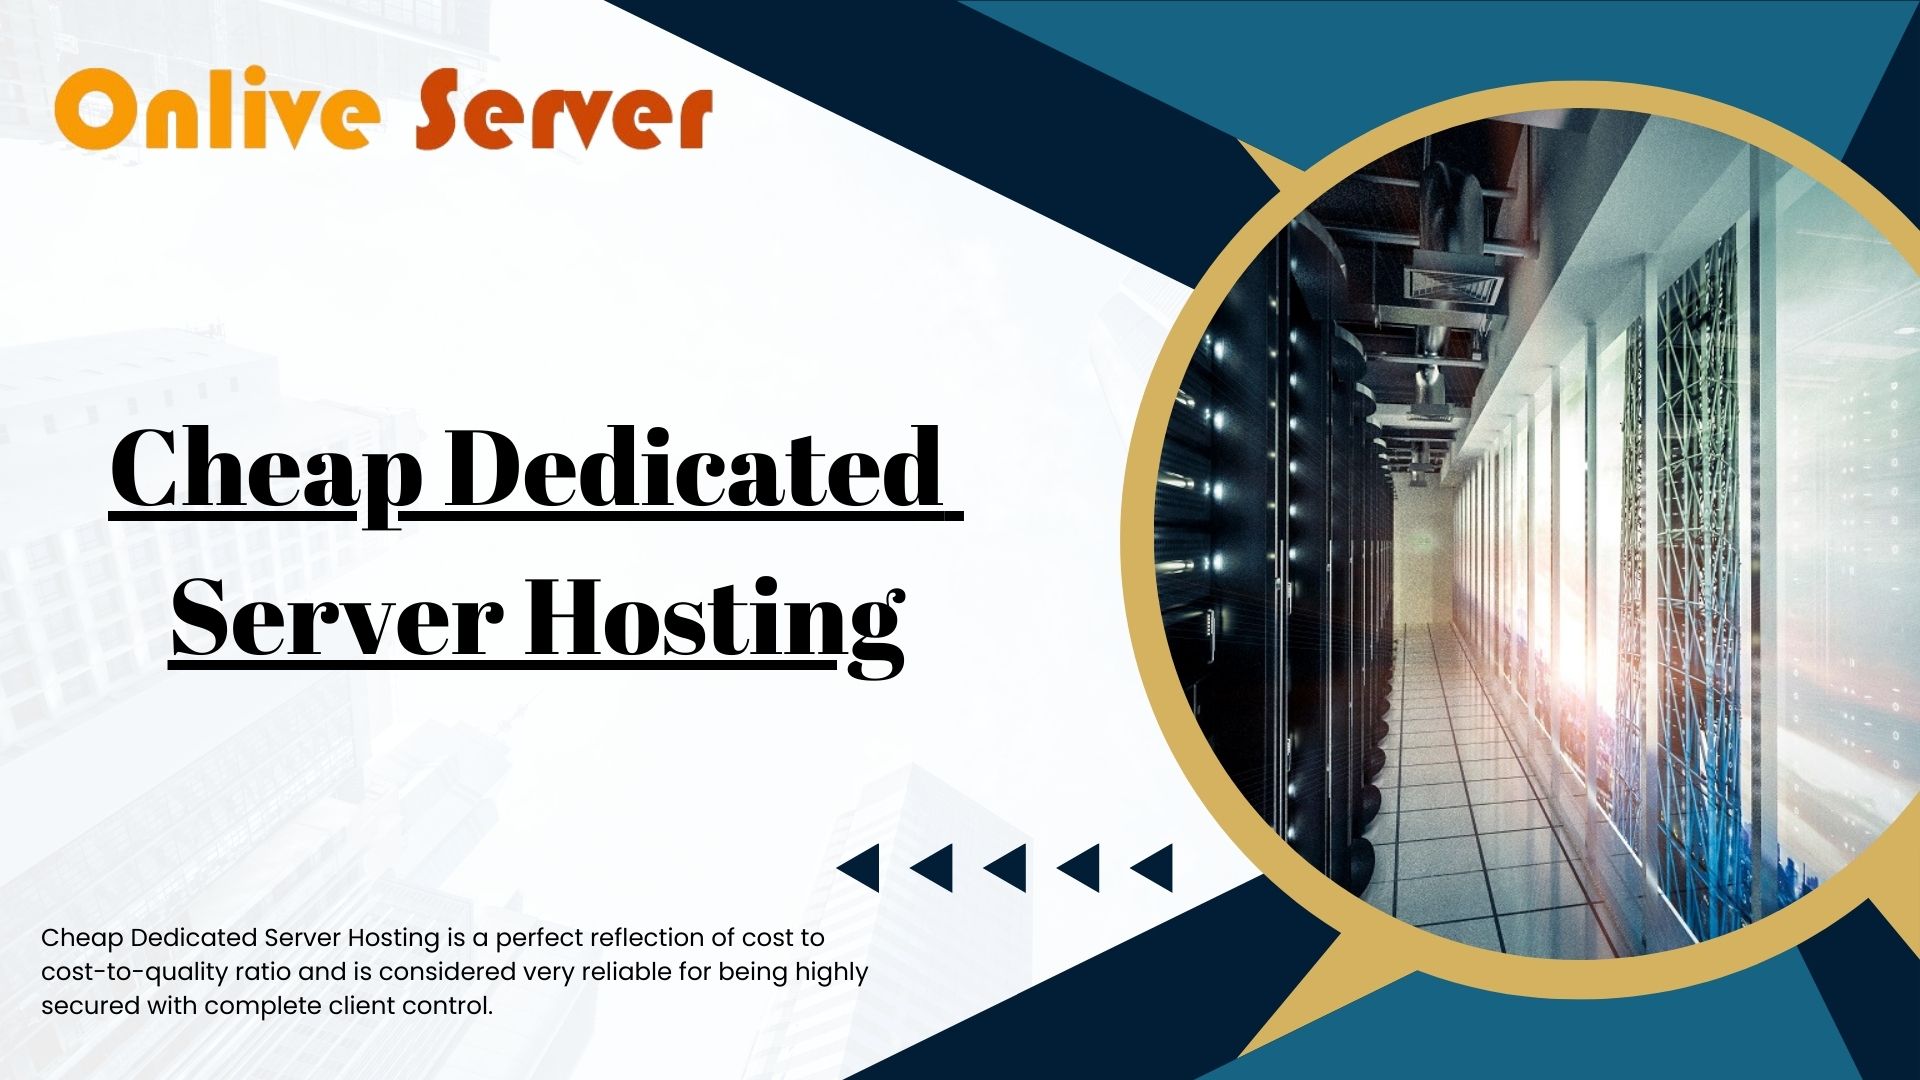 Complete Control & Security with Cheap Dedicated Server Hosting Solutions